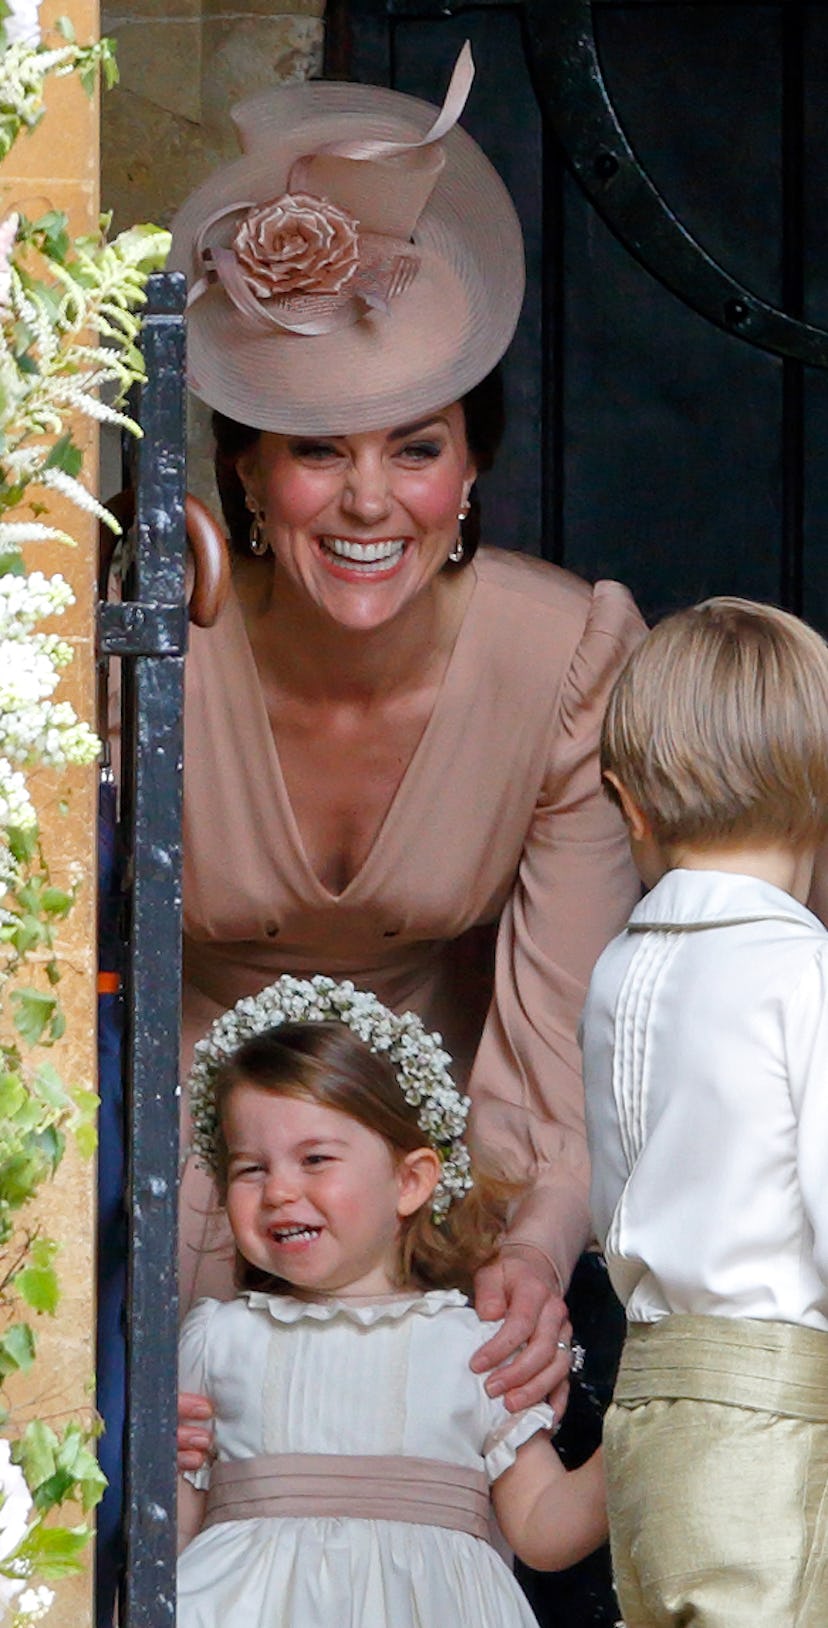 Kate Middleton and Princess Charlotte giggled excitedly when they saw her sister Pippa Middleton.